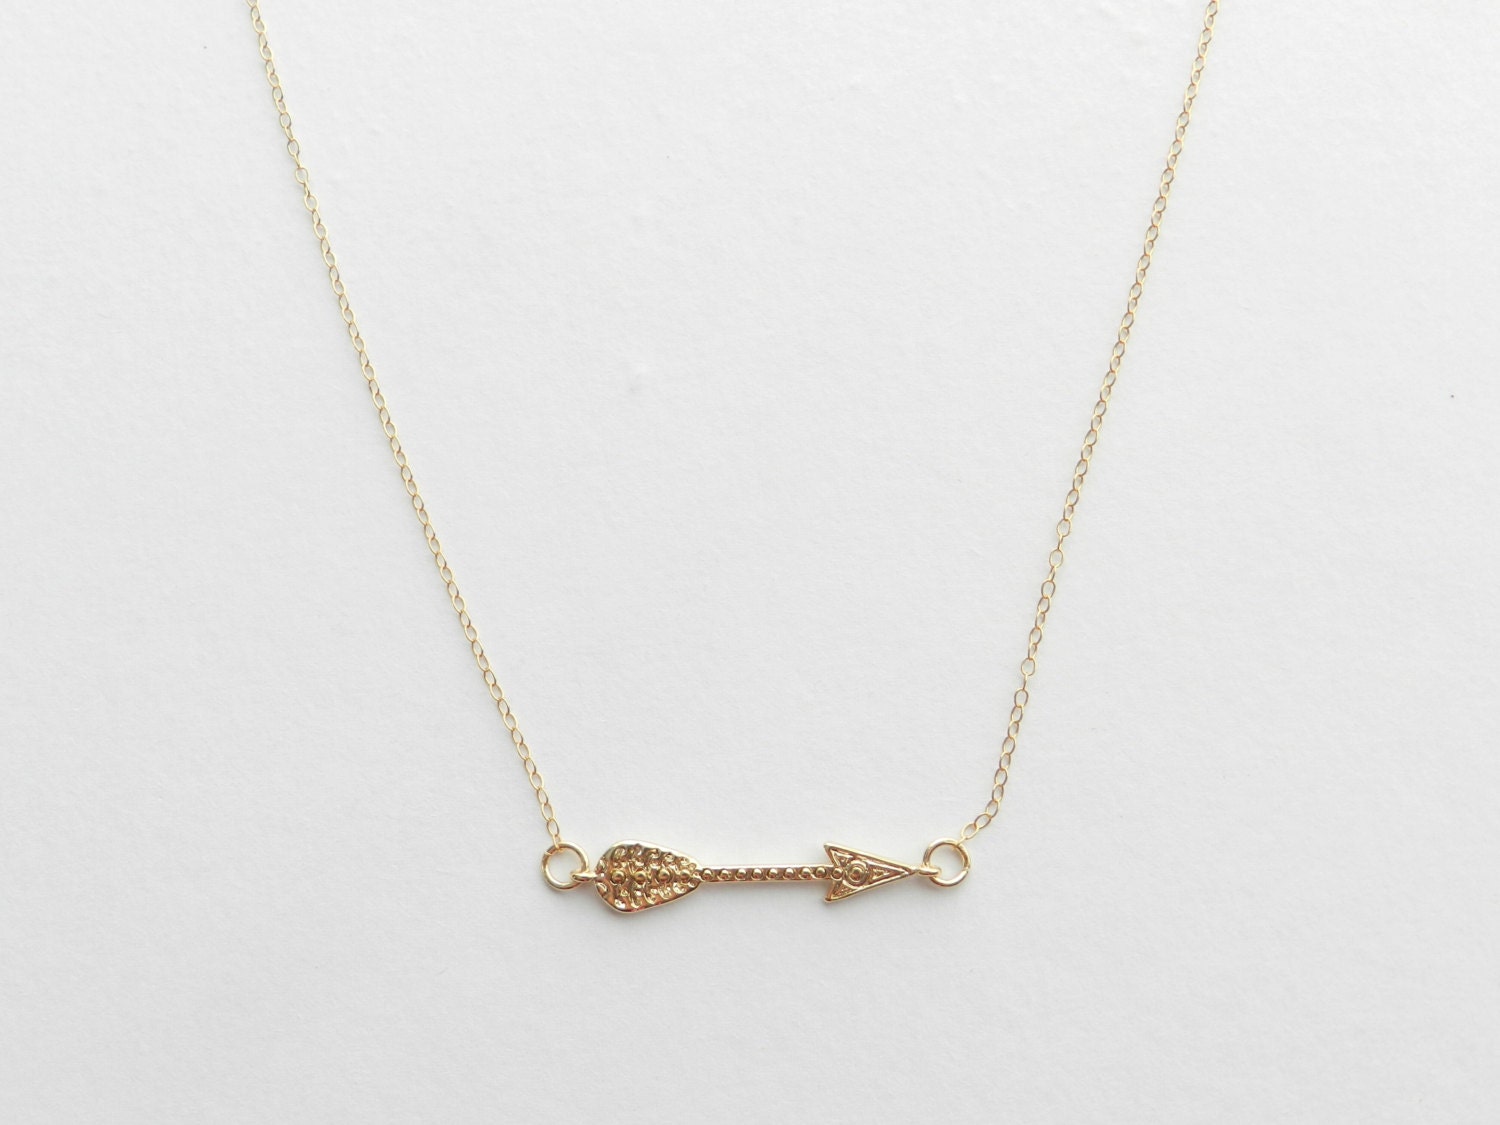 Arrow necklace on 14k gold filled chain.